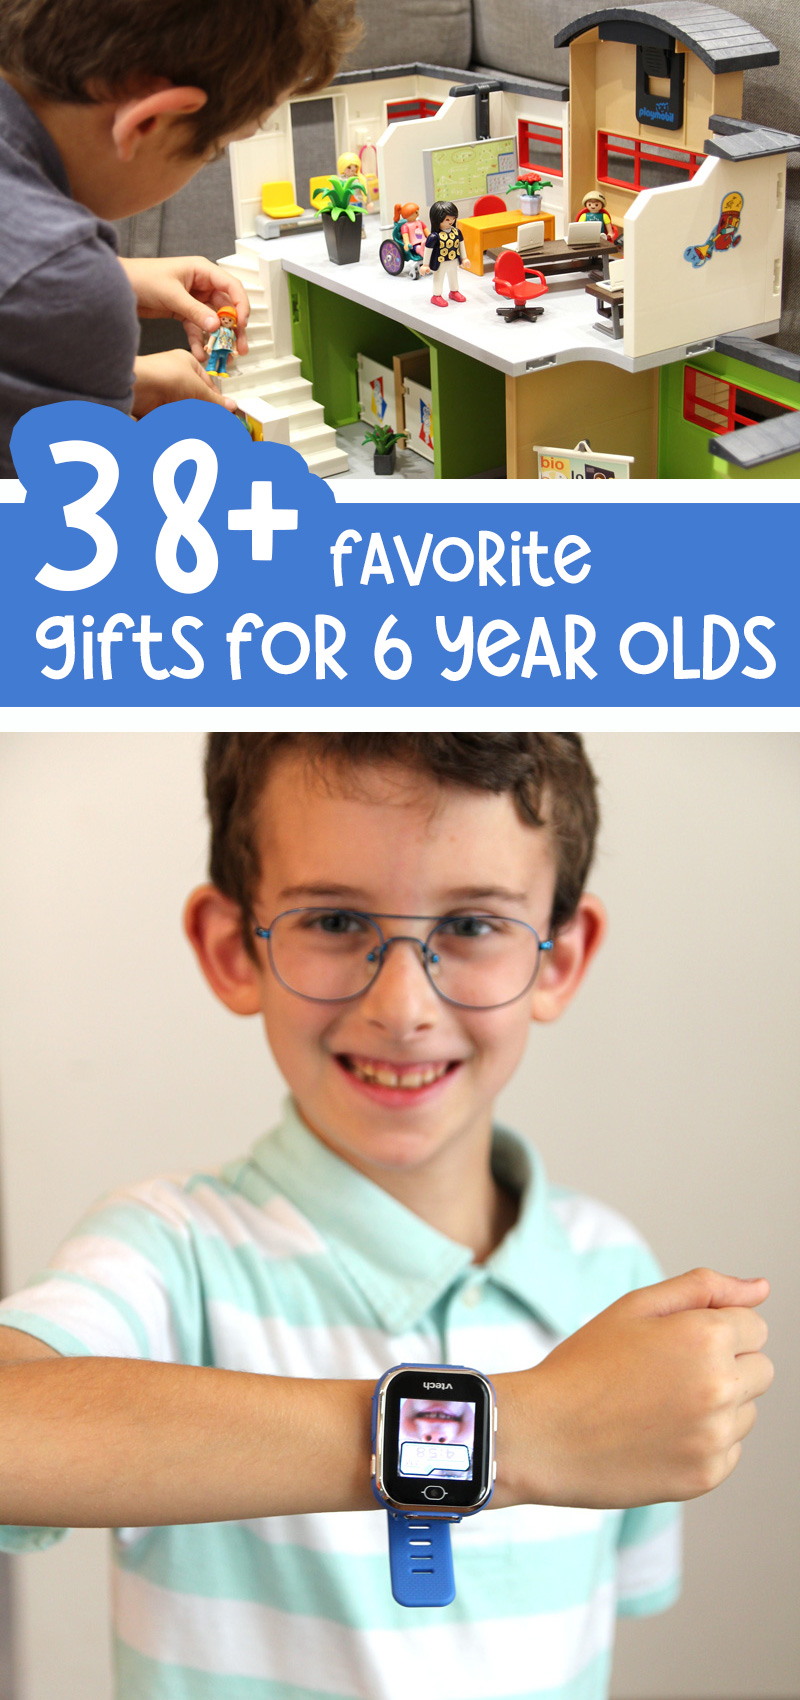 25 Amazing and Unique Return Gift Ideas for Kids